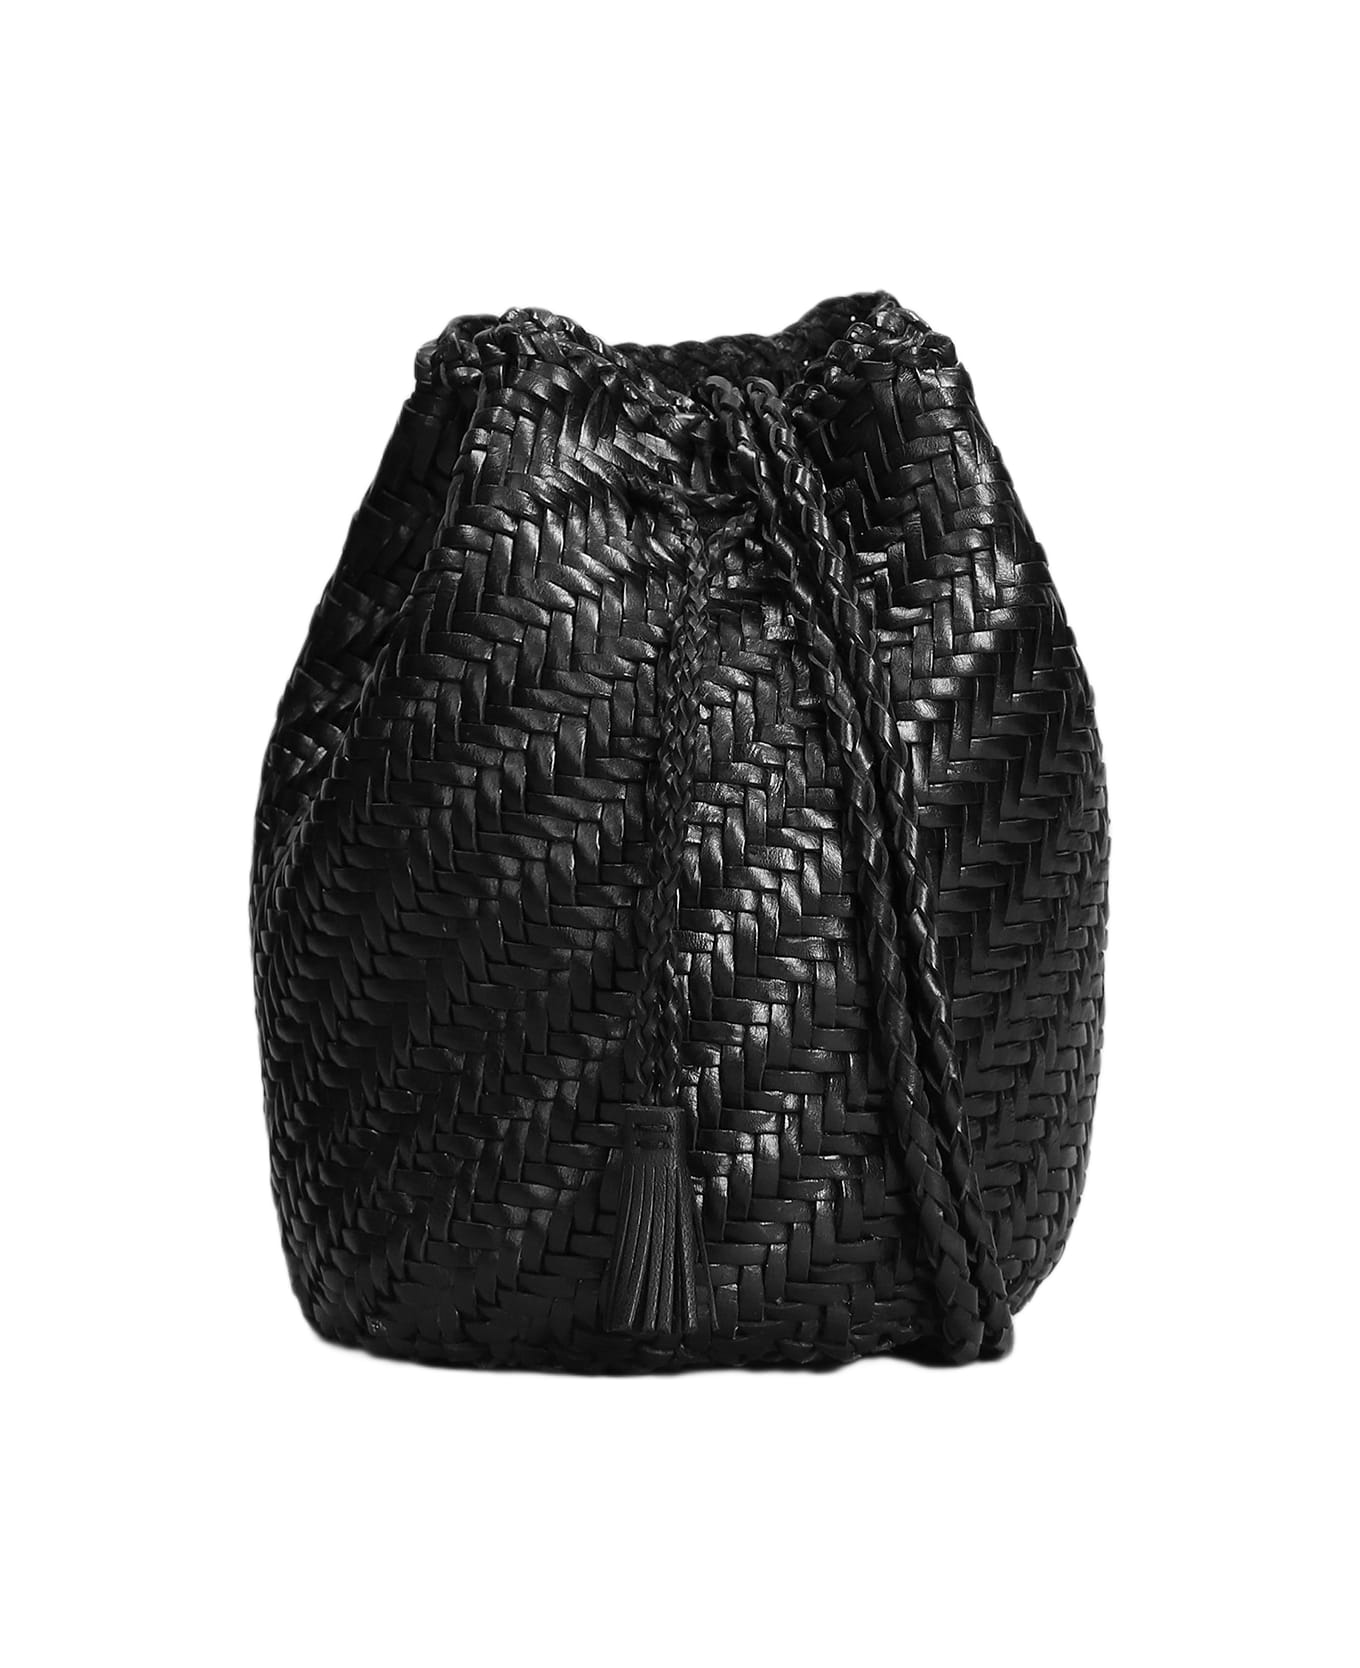 Dragon Diffusion Pompom Double Hand Bag In Black Leather - black